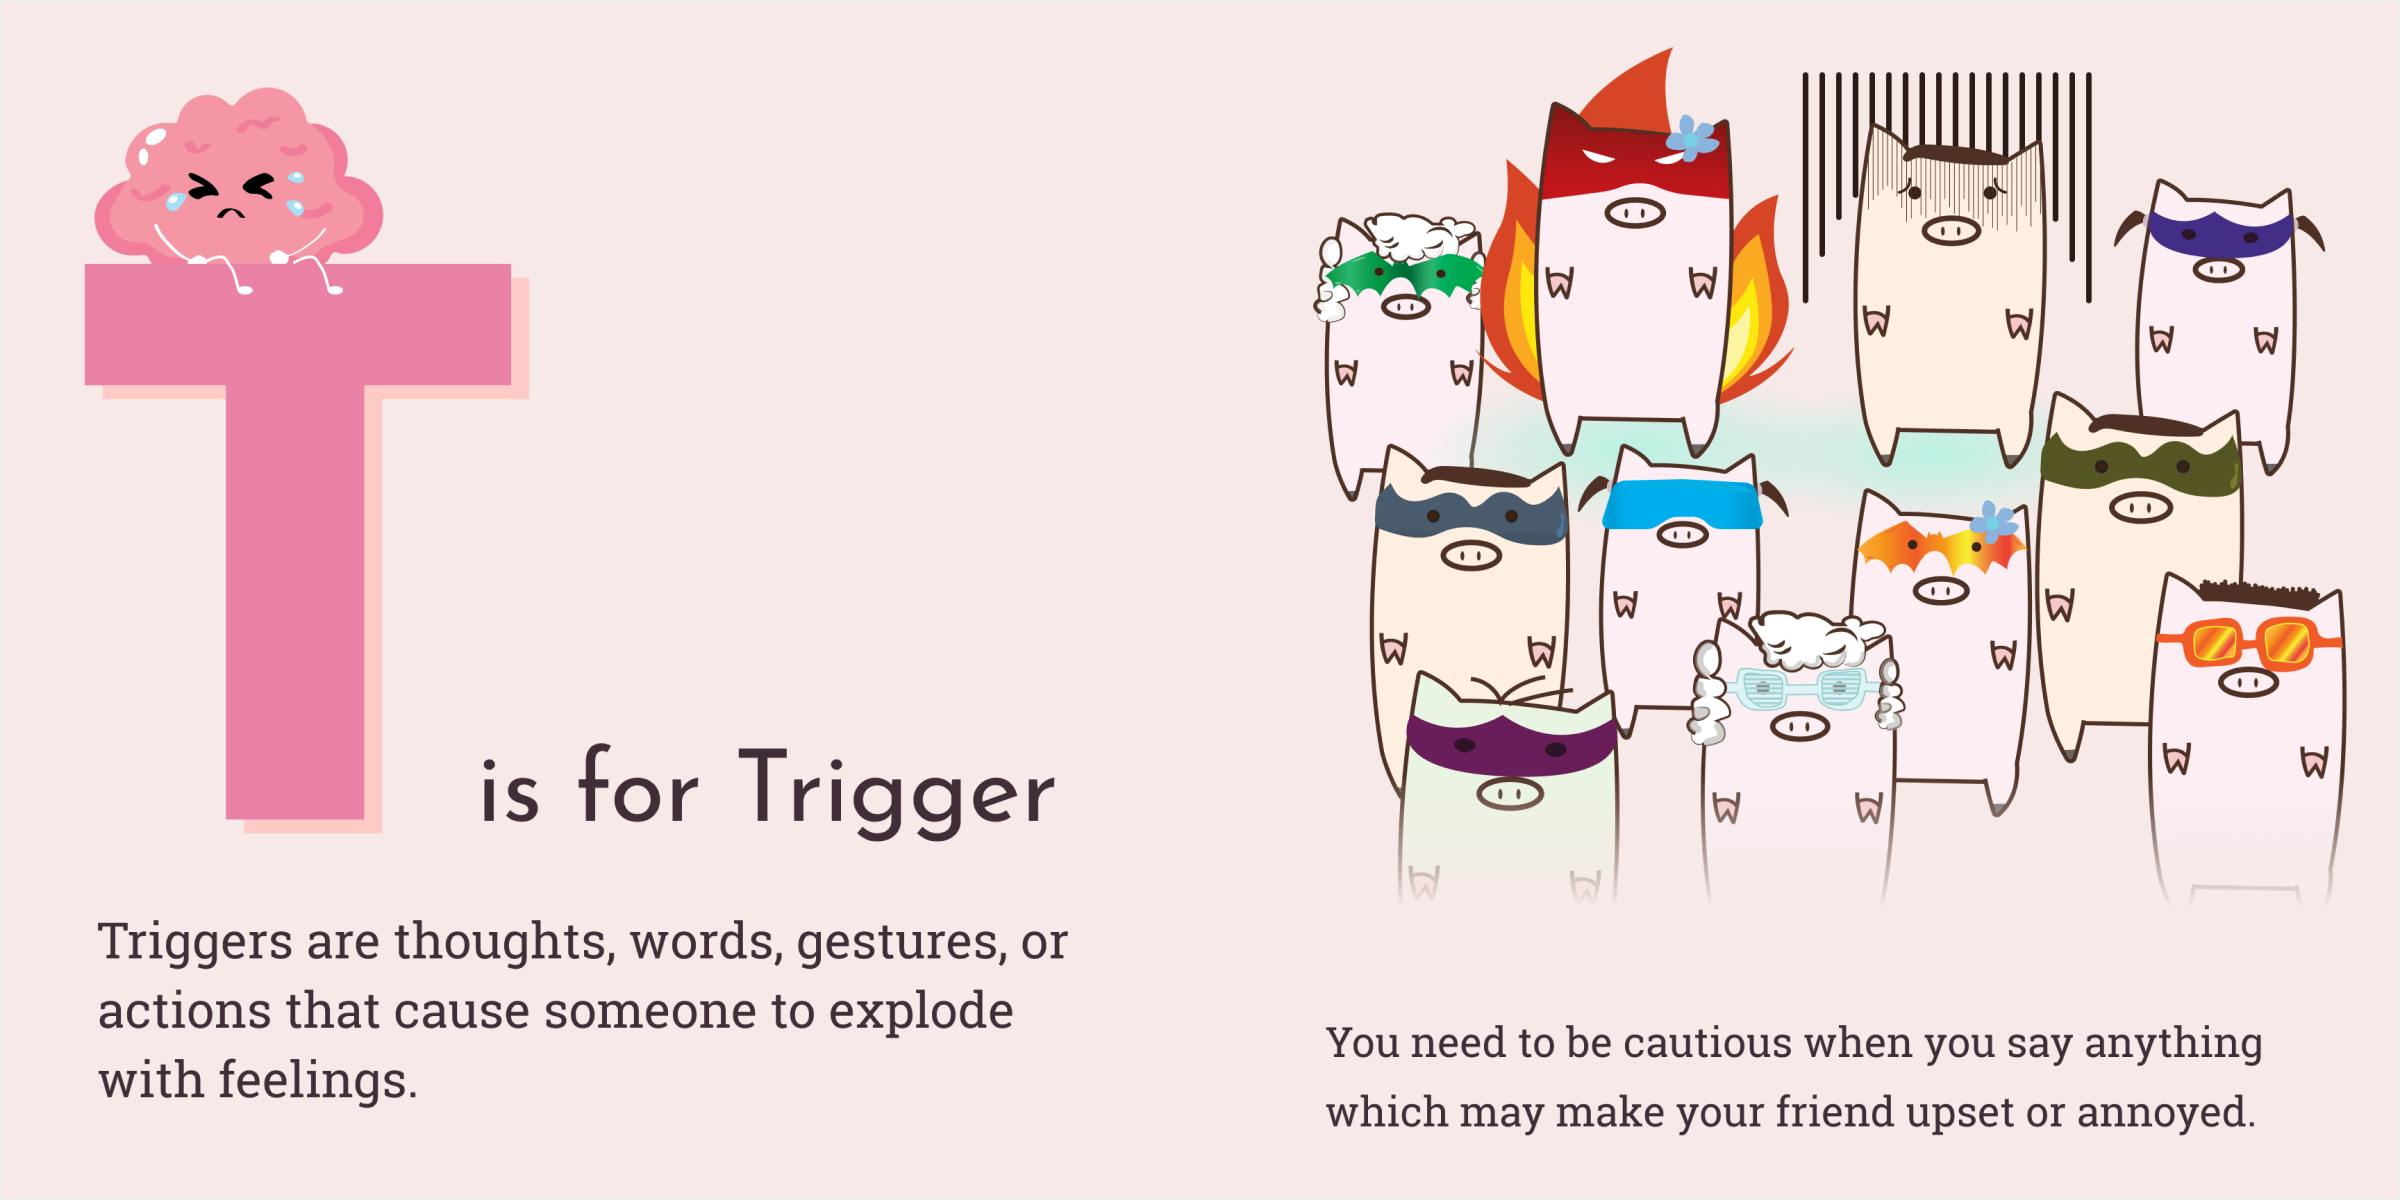 Illustrations of Pigs depicting what triggers are